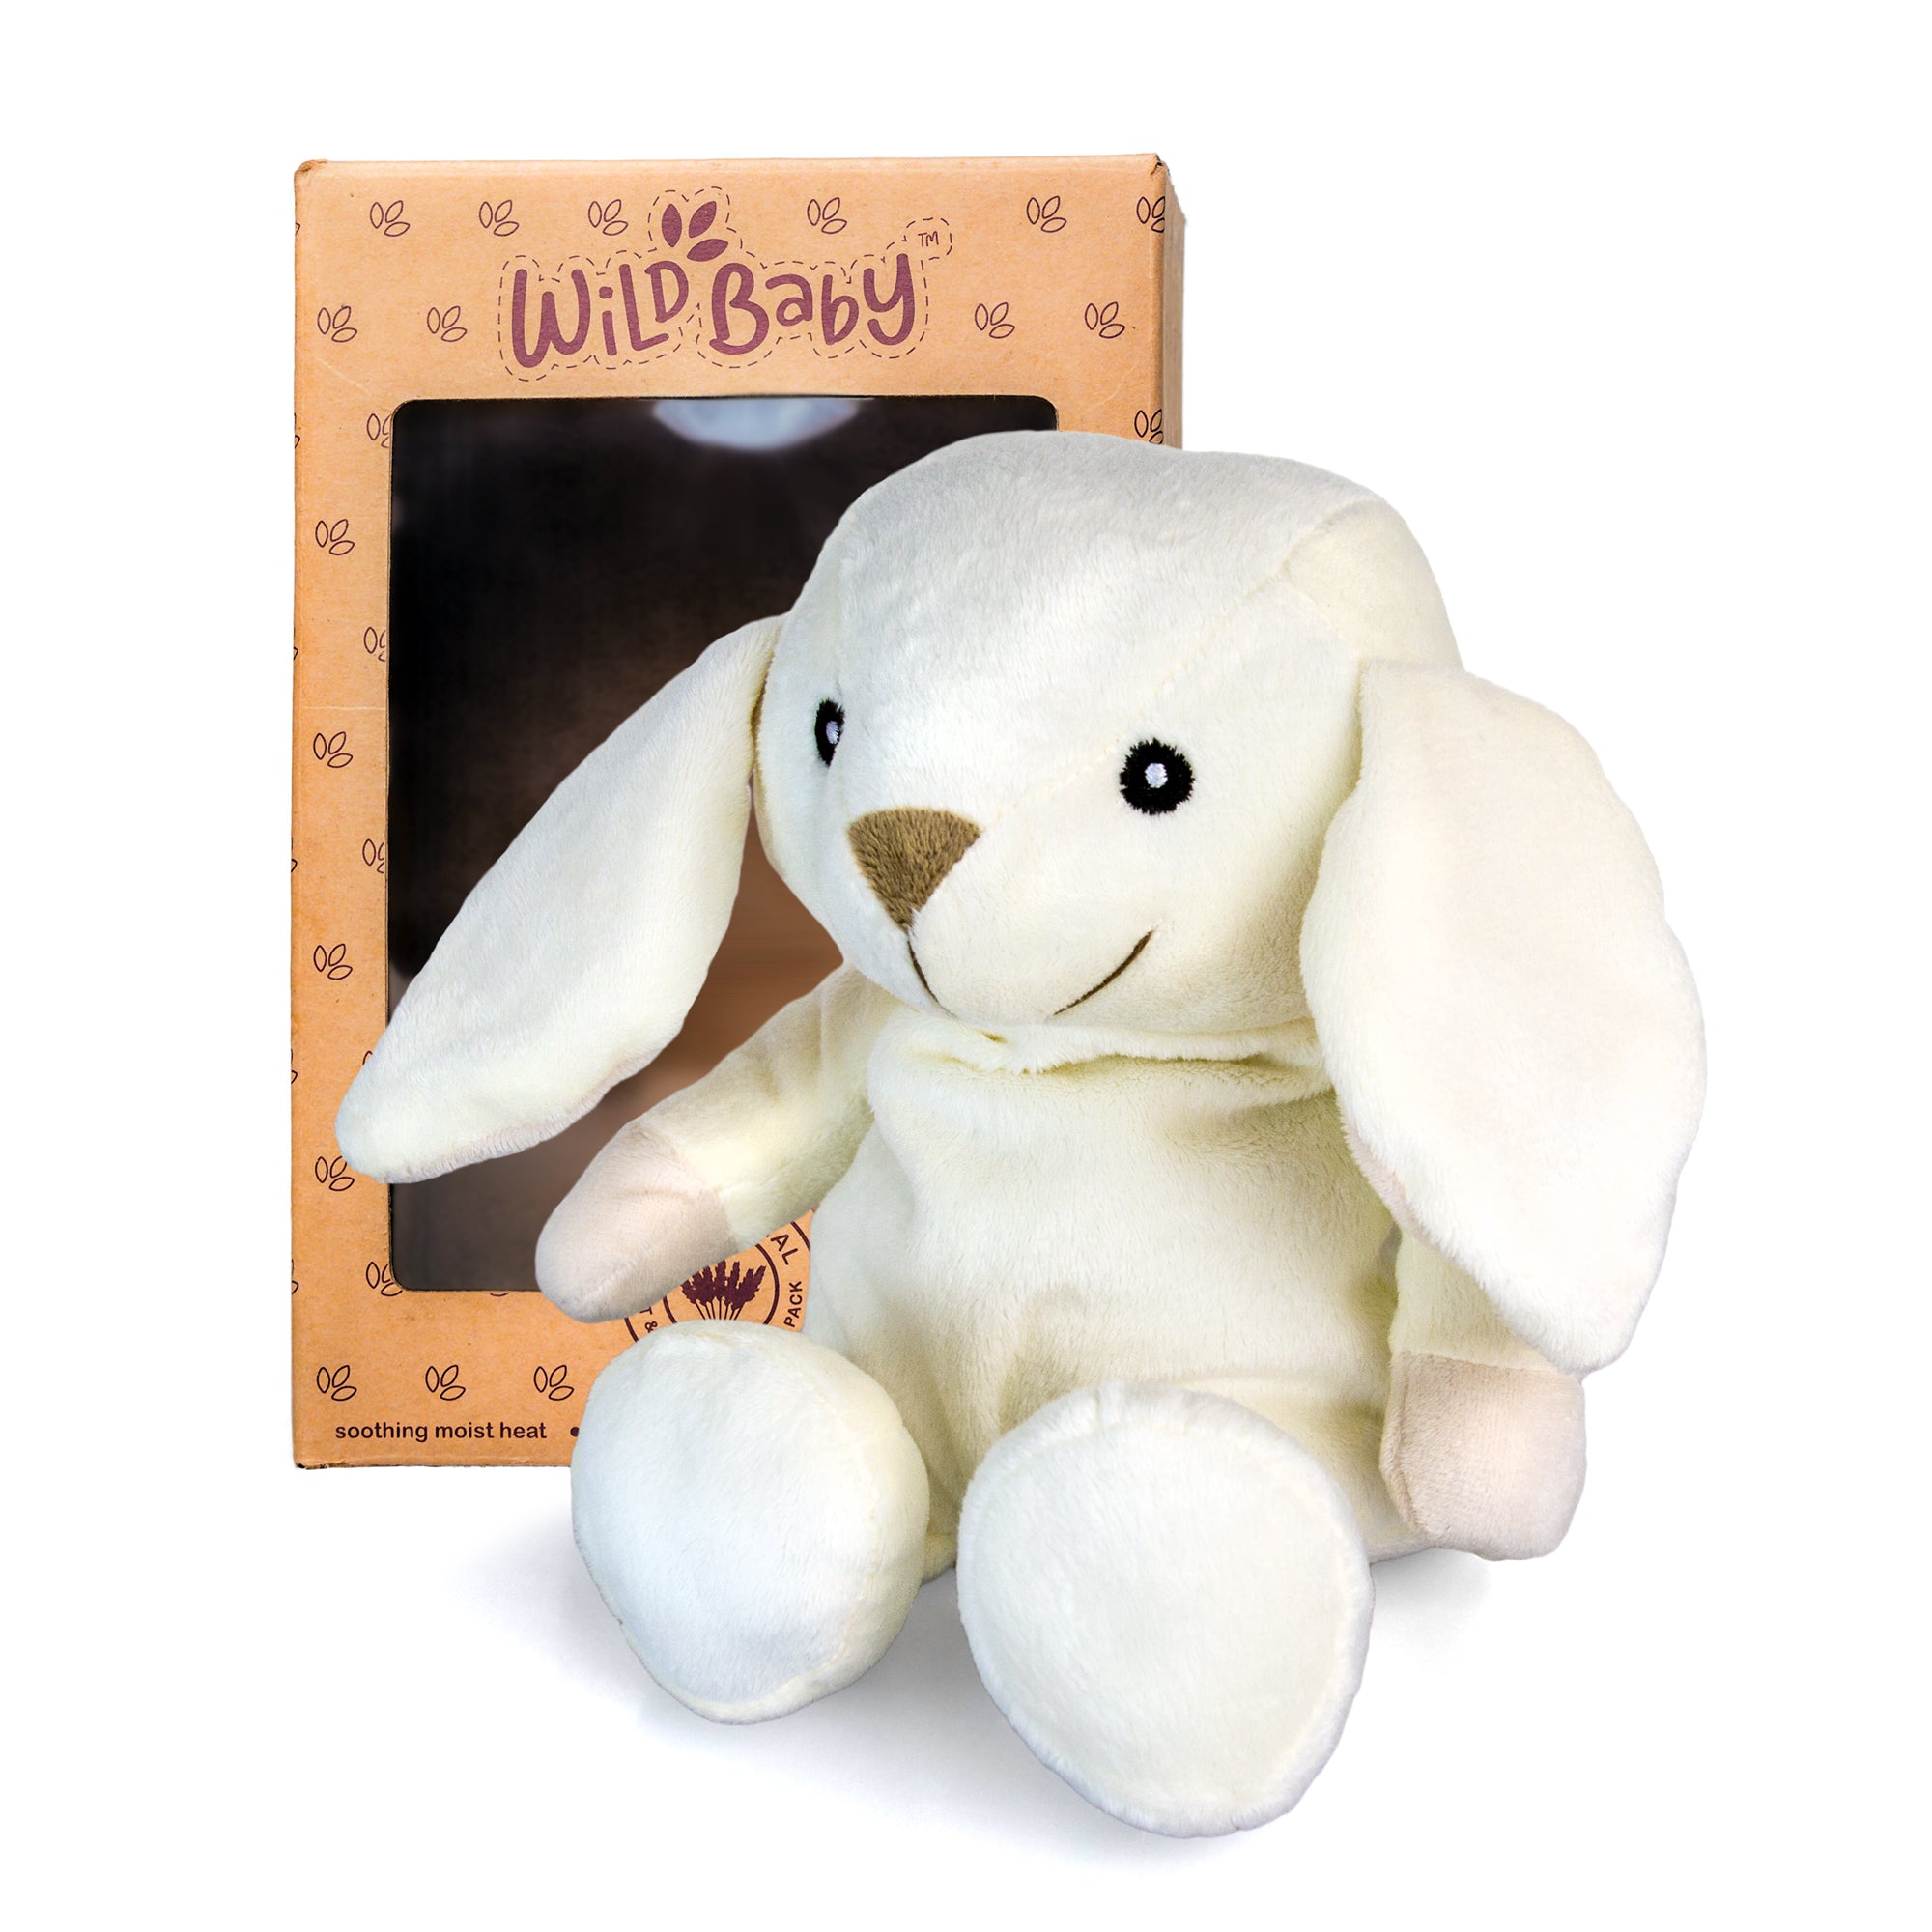 Bunny Rabbit Stuffed Animal - Microwaveable Plush with Hot Cold Pack